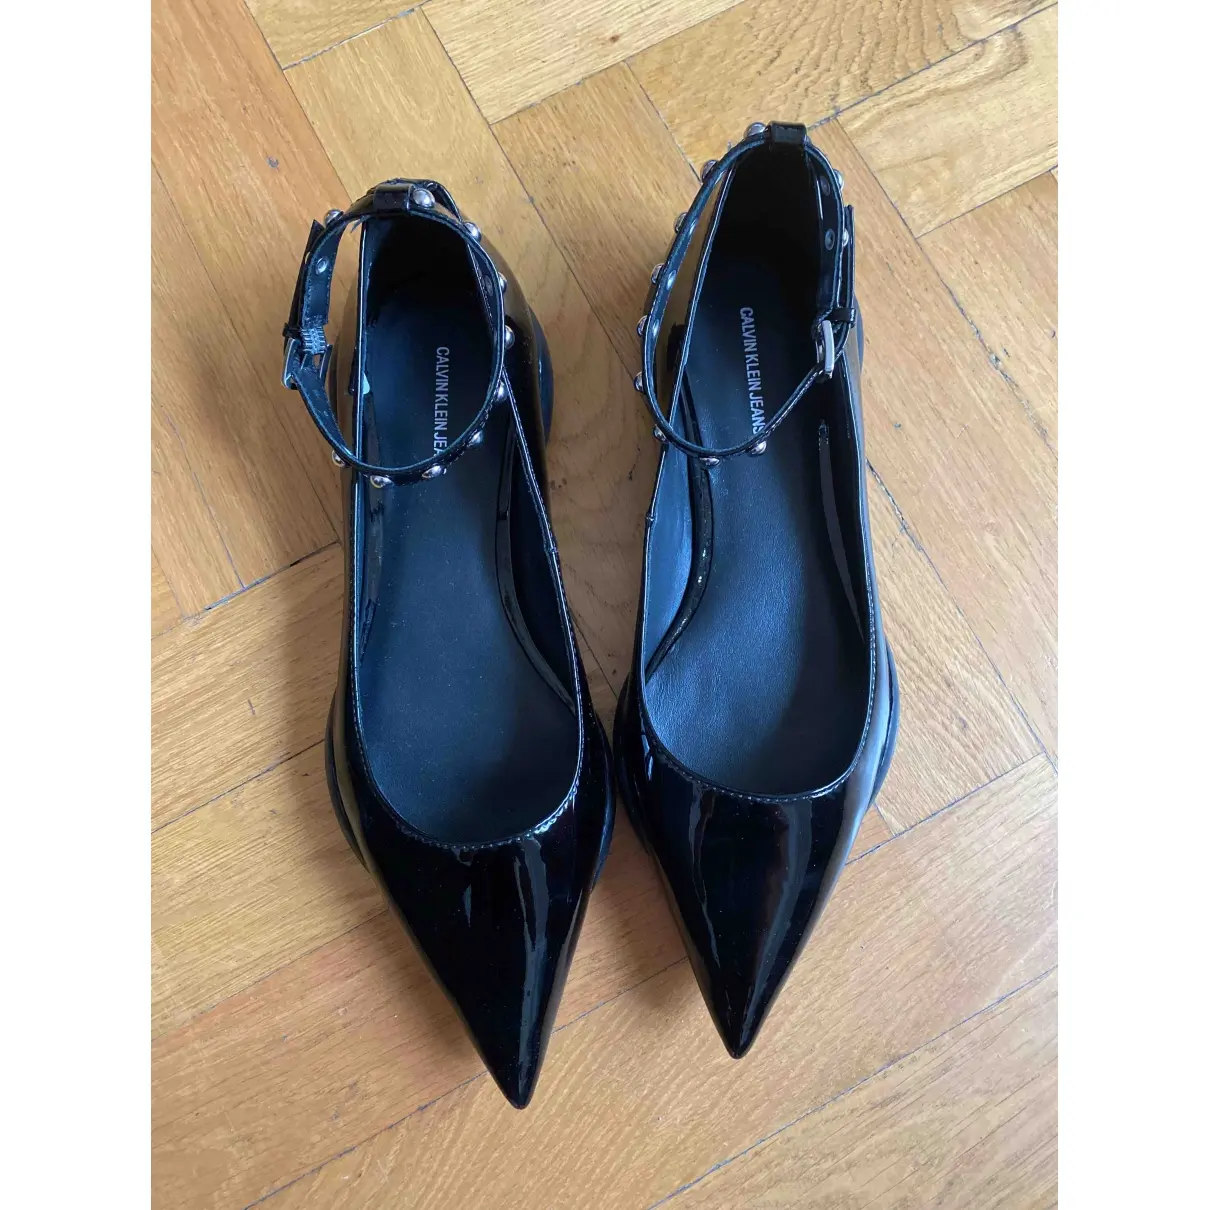 Calvin Klein Patent leather ballet flats for sale